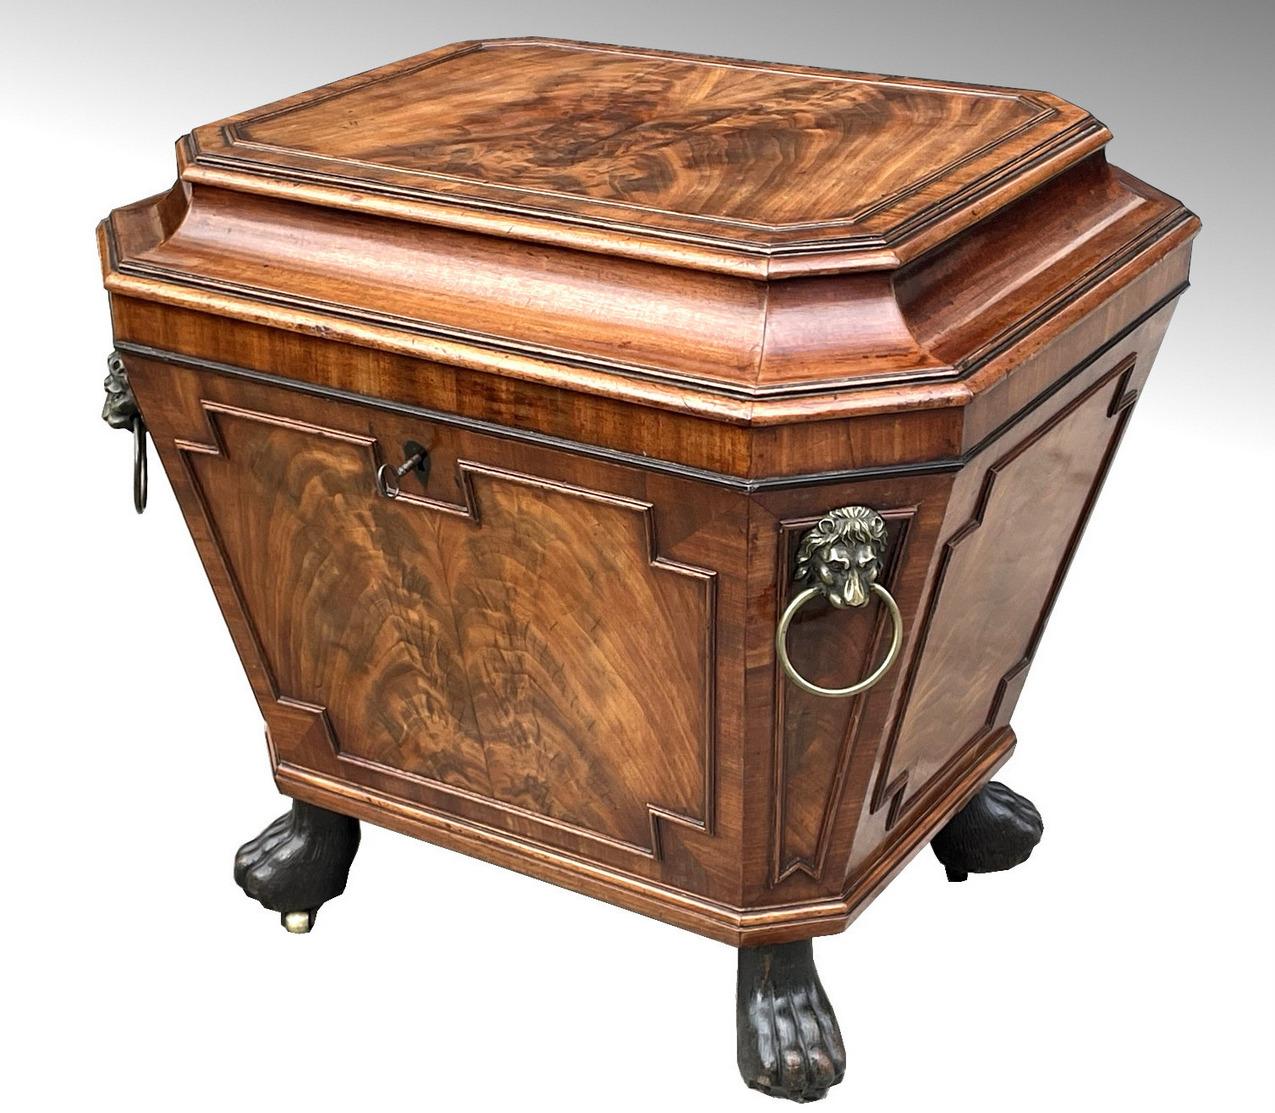 Superb Flame Mahogany Wine Cellarette of sarcophagus outline and of English origin. First quarter of the 19th century, Regency period. 

The flat top lid opening to reveal the interior with its original lead lining and stopper, each upper corner